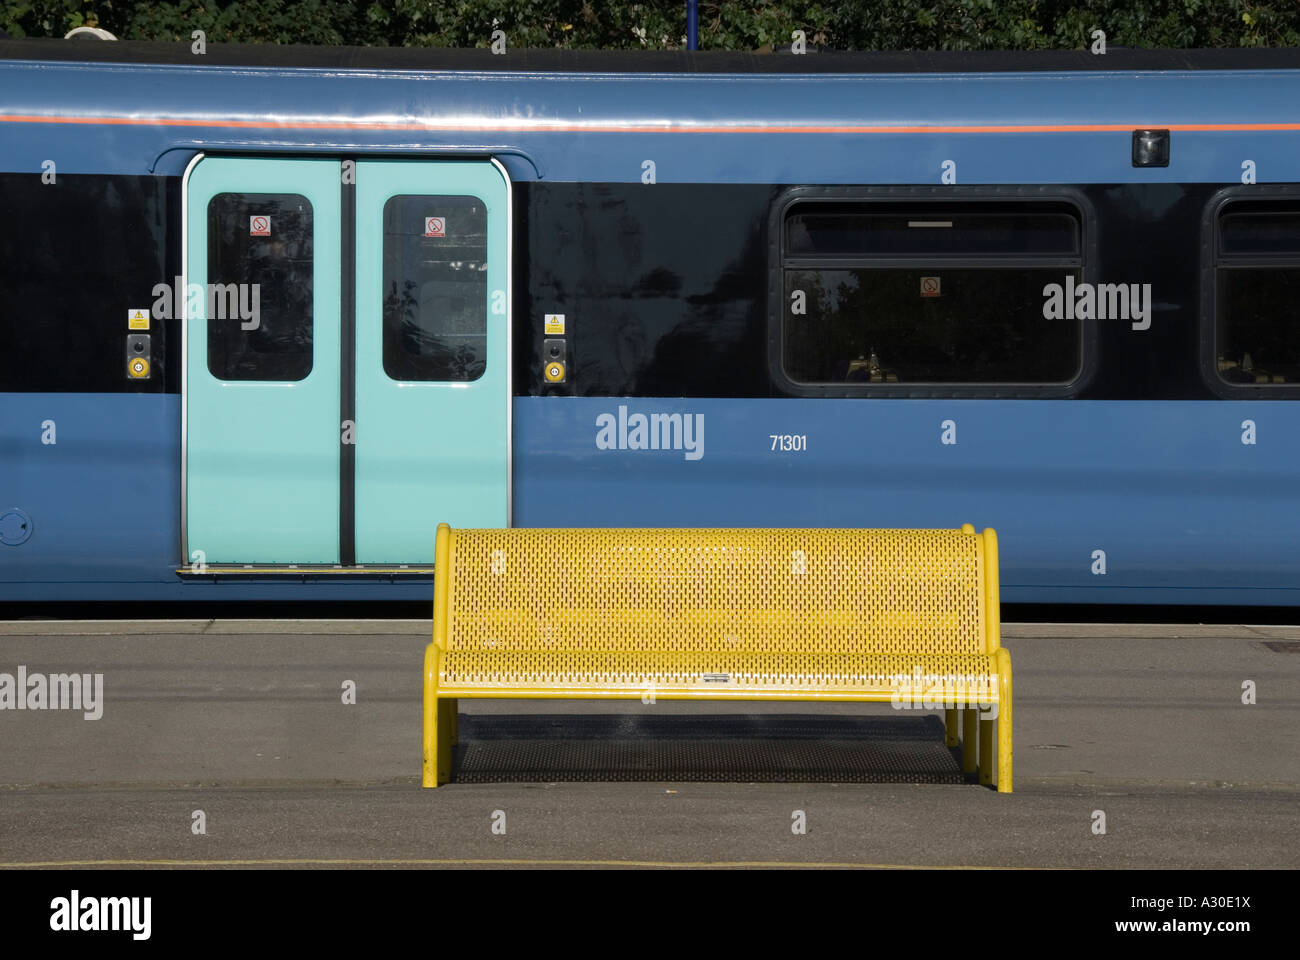 Train station platform seat painted bright yellow contrasted with colours & shapes of public transport railway passenger carriage Essex England UK Stock Photo